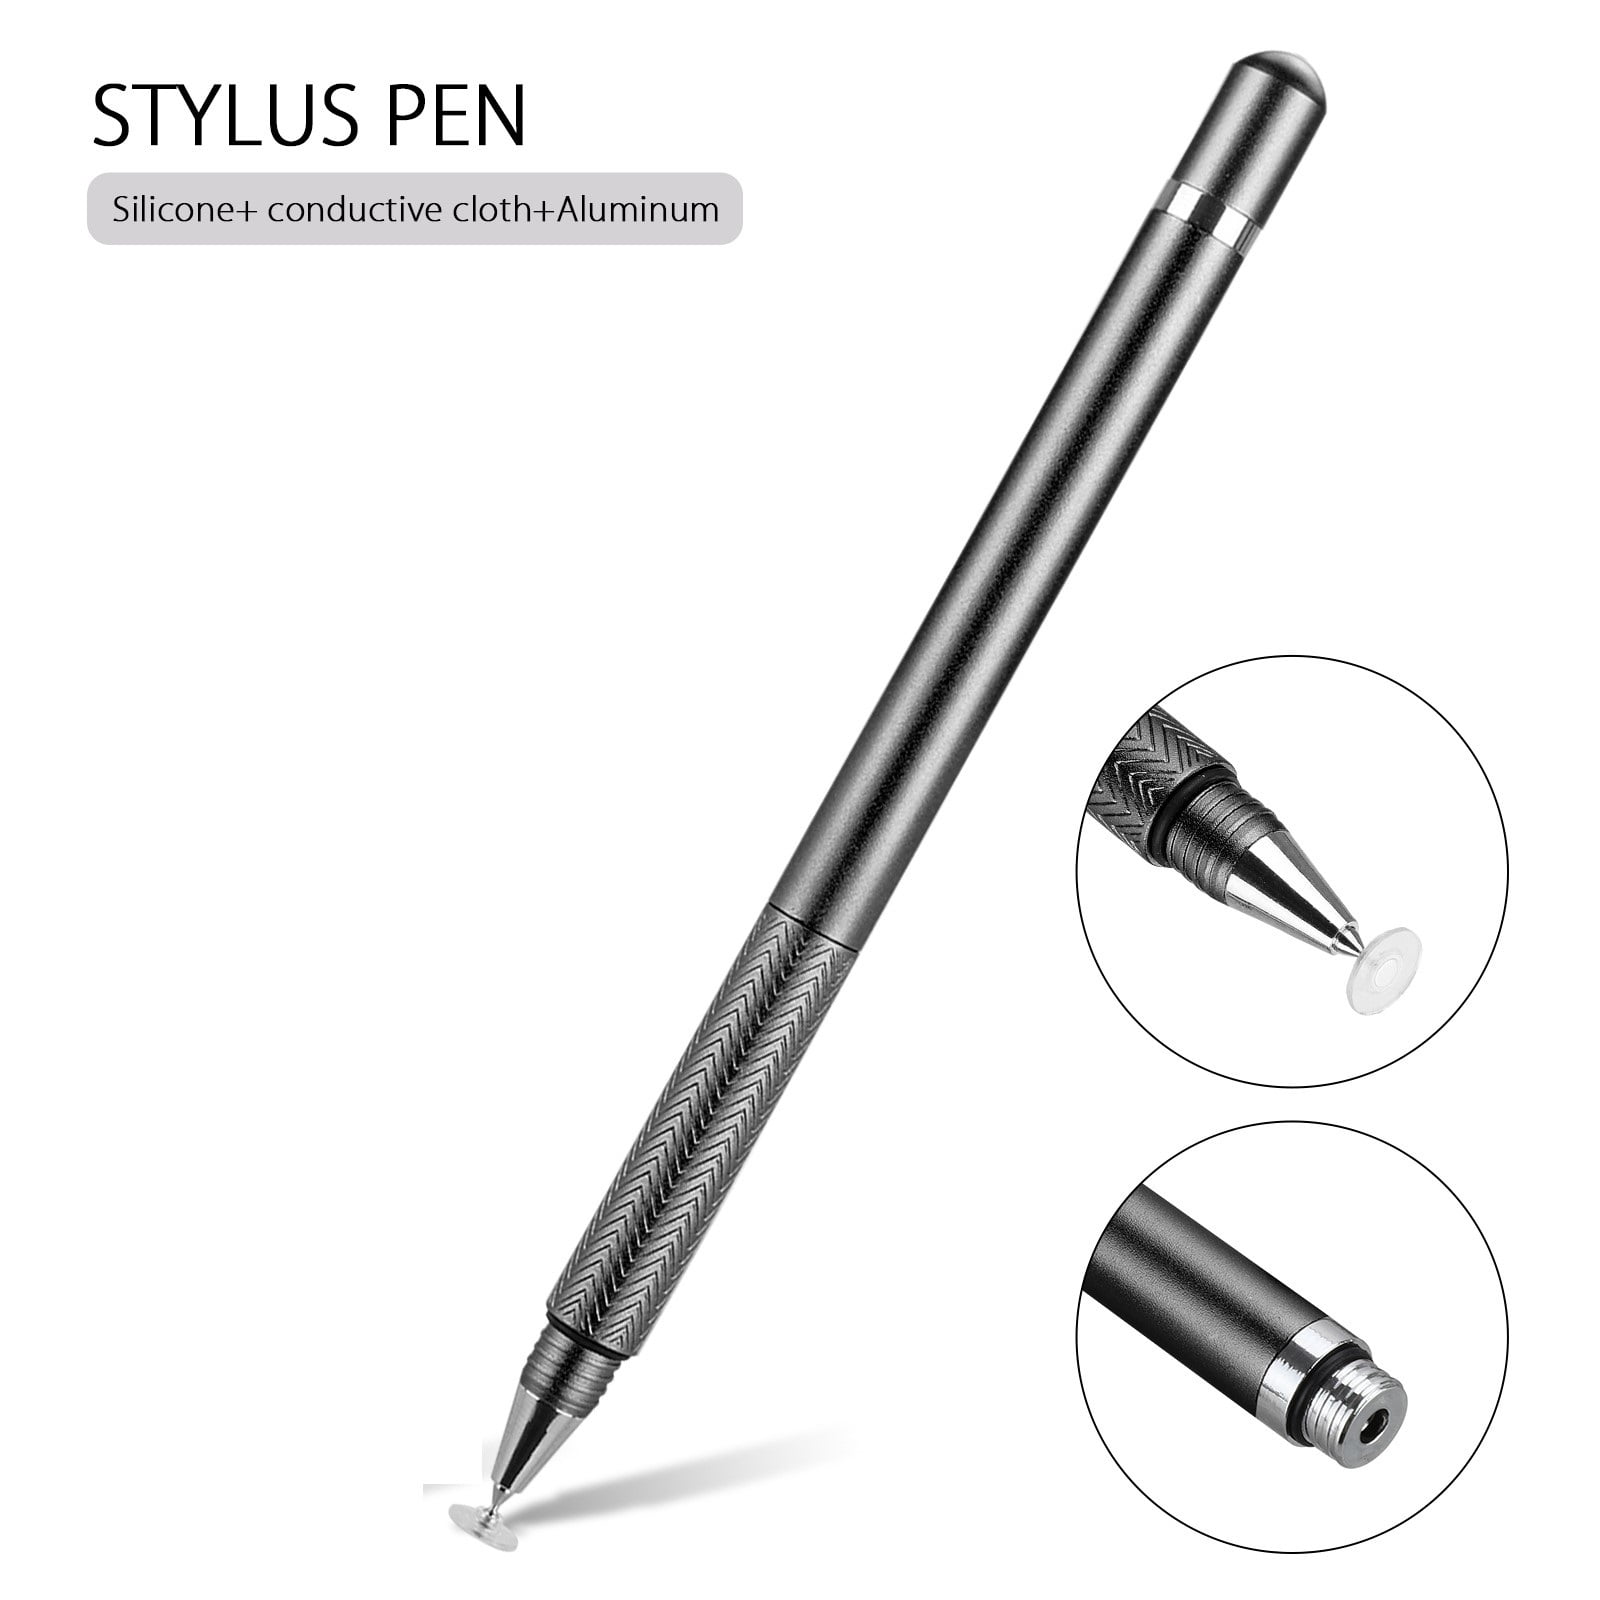 NEW IN PACKAGE HIGH SENSITIVITY STYLUS PENS 